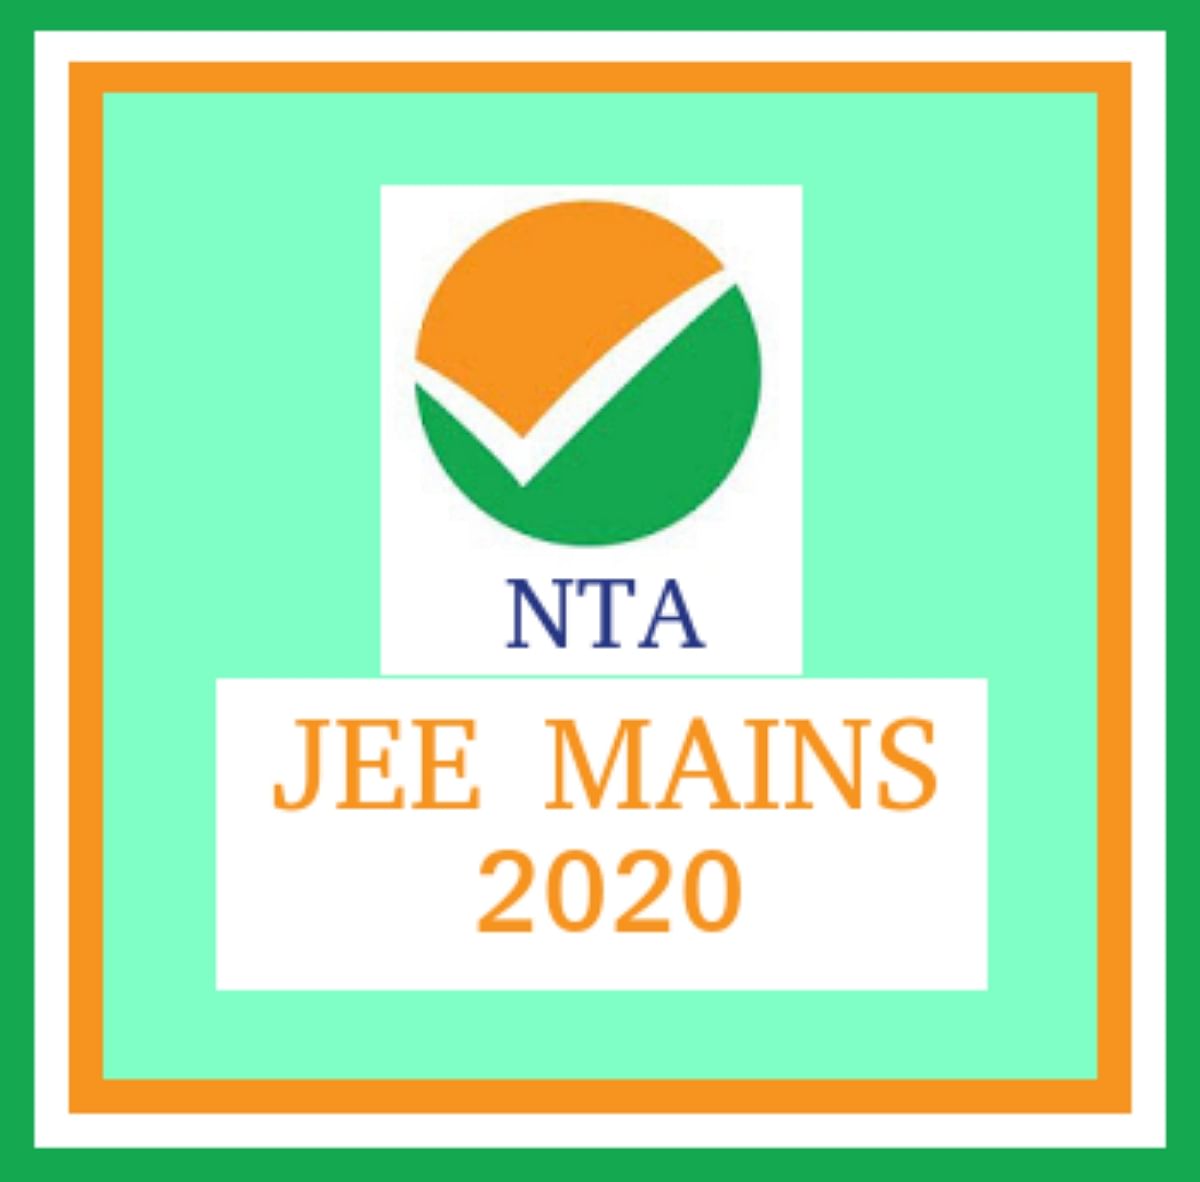 JEE Mains 2020: Candidates Free to Change Exam City till April 14, Details Here